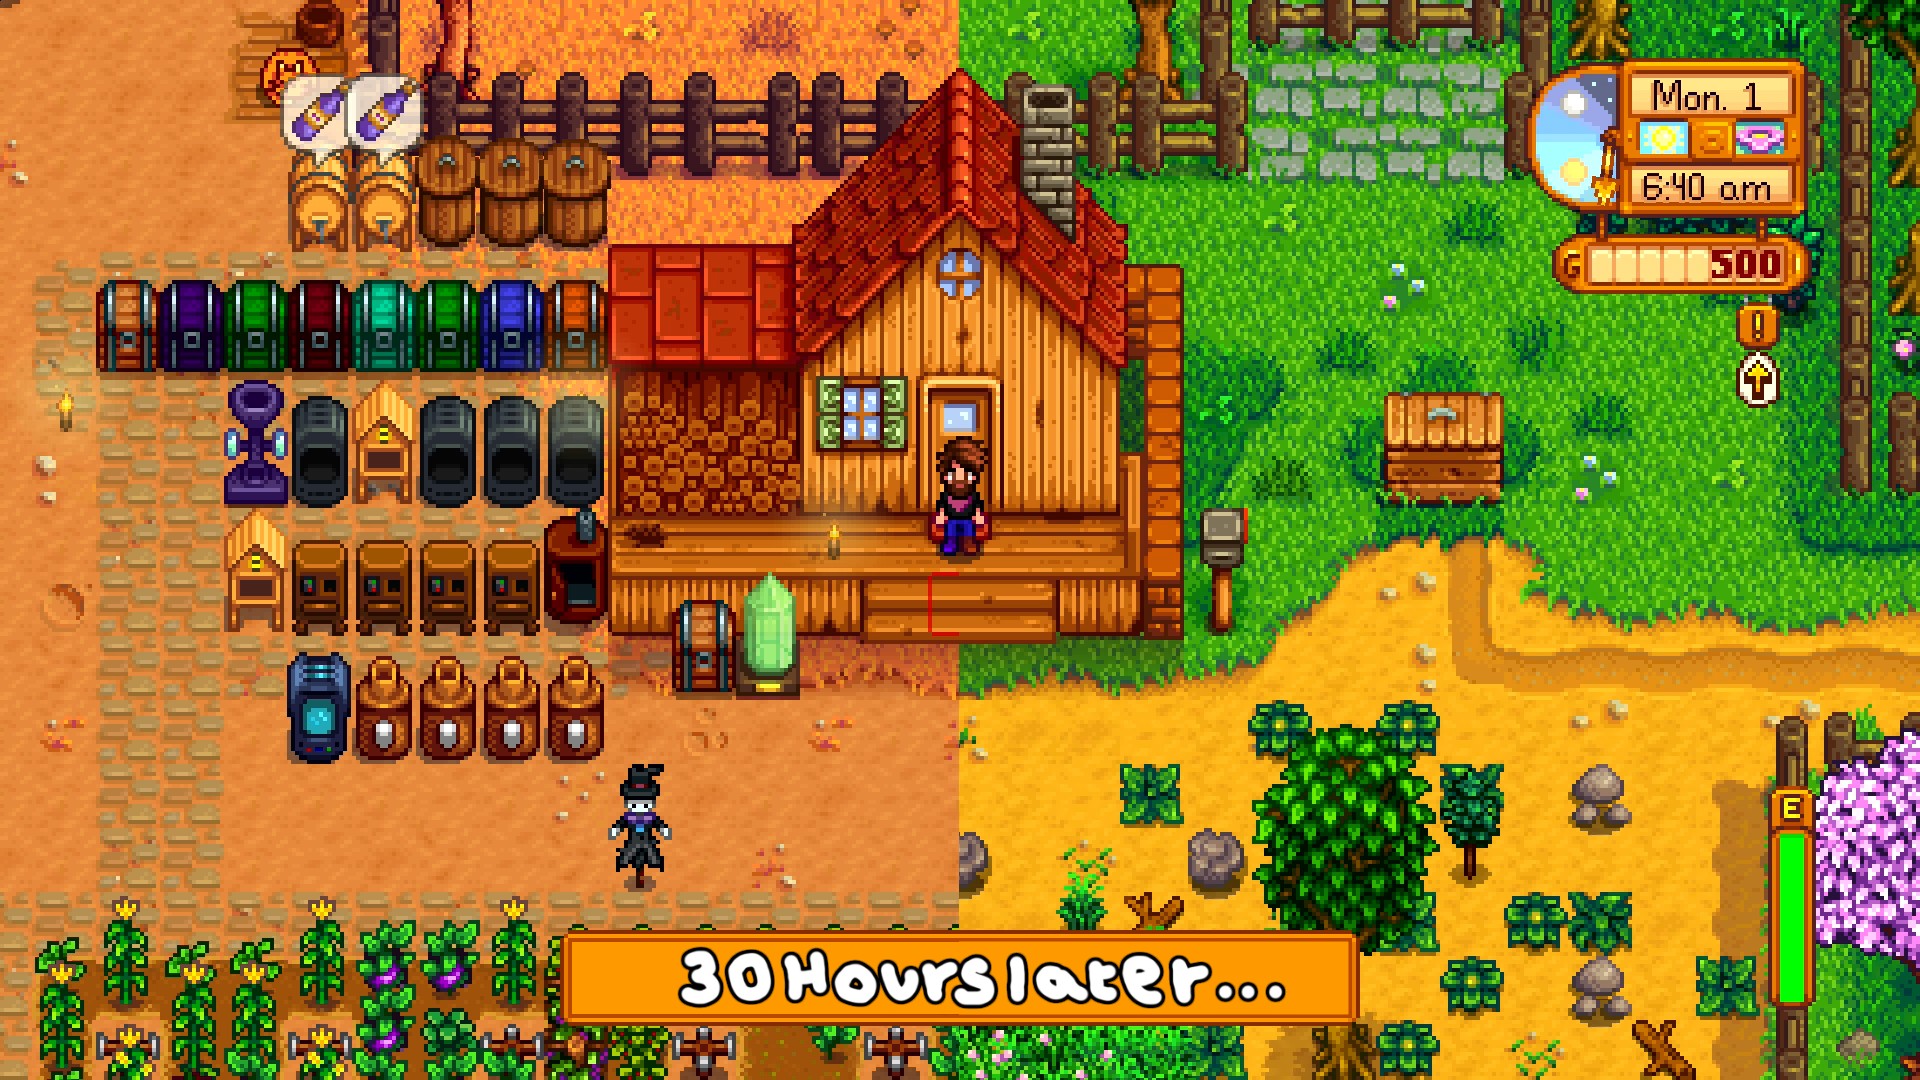 stardew valley switch couch co op